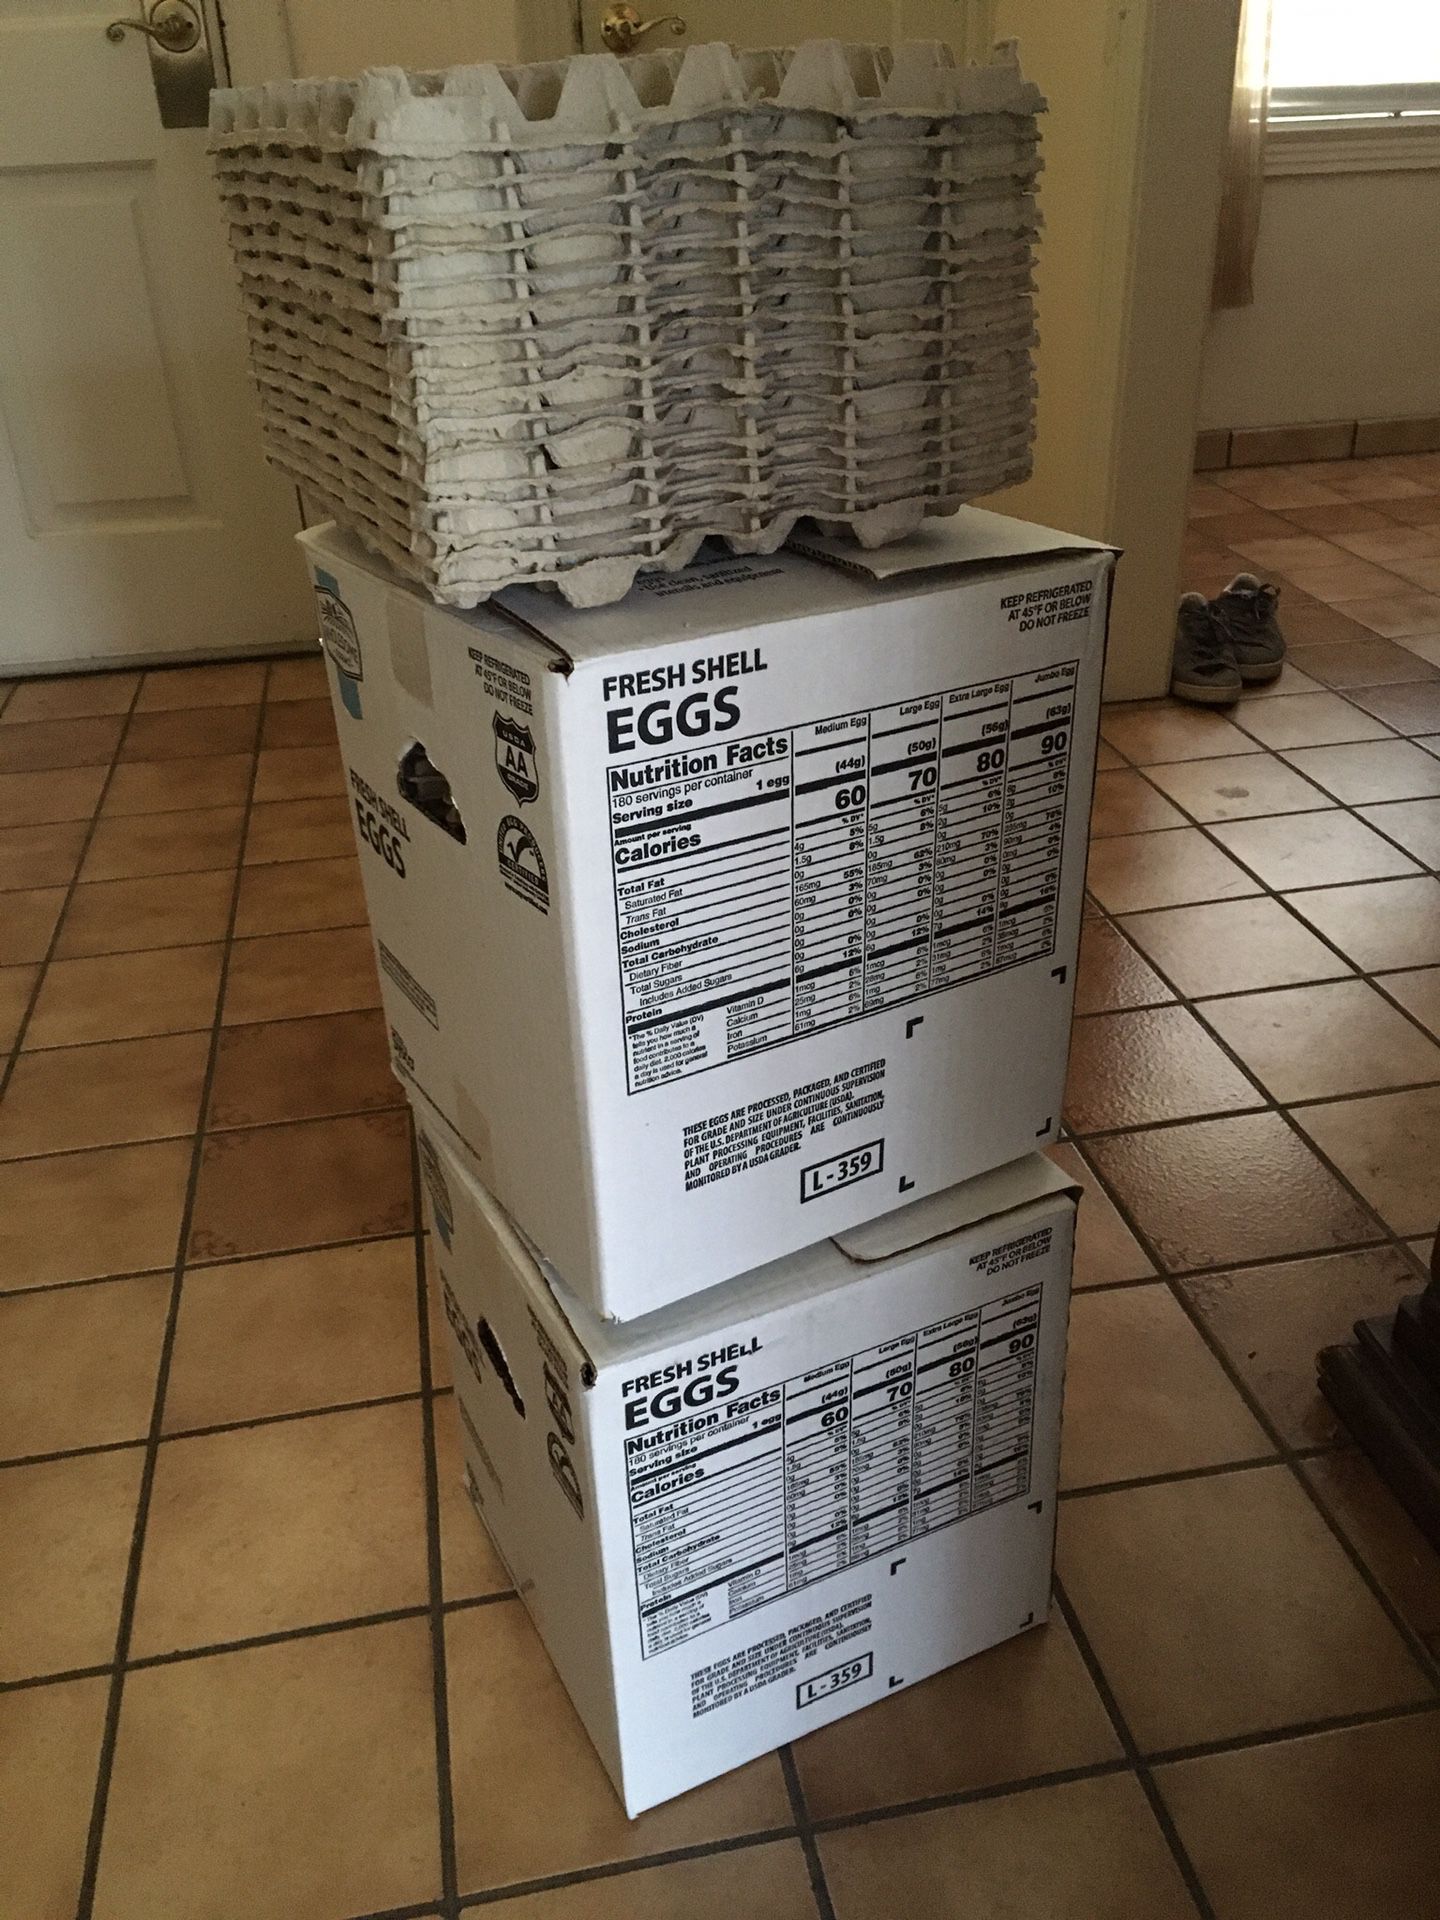 Egg crates,32 in box. $1 each crate or $20 for a box.